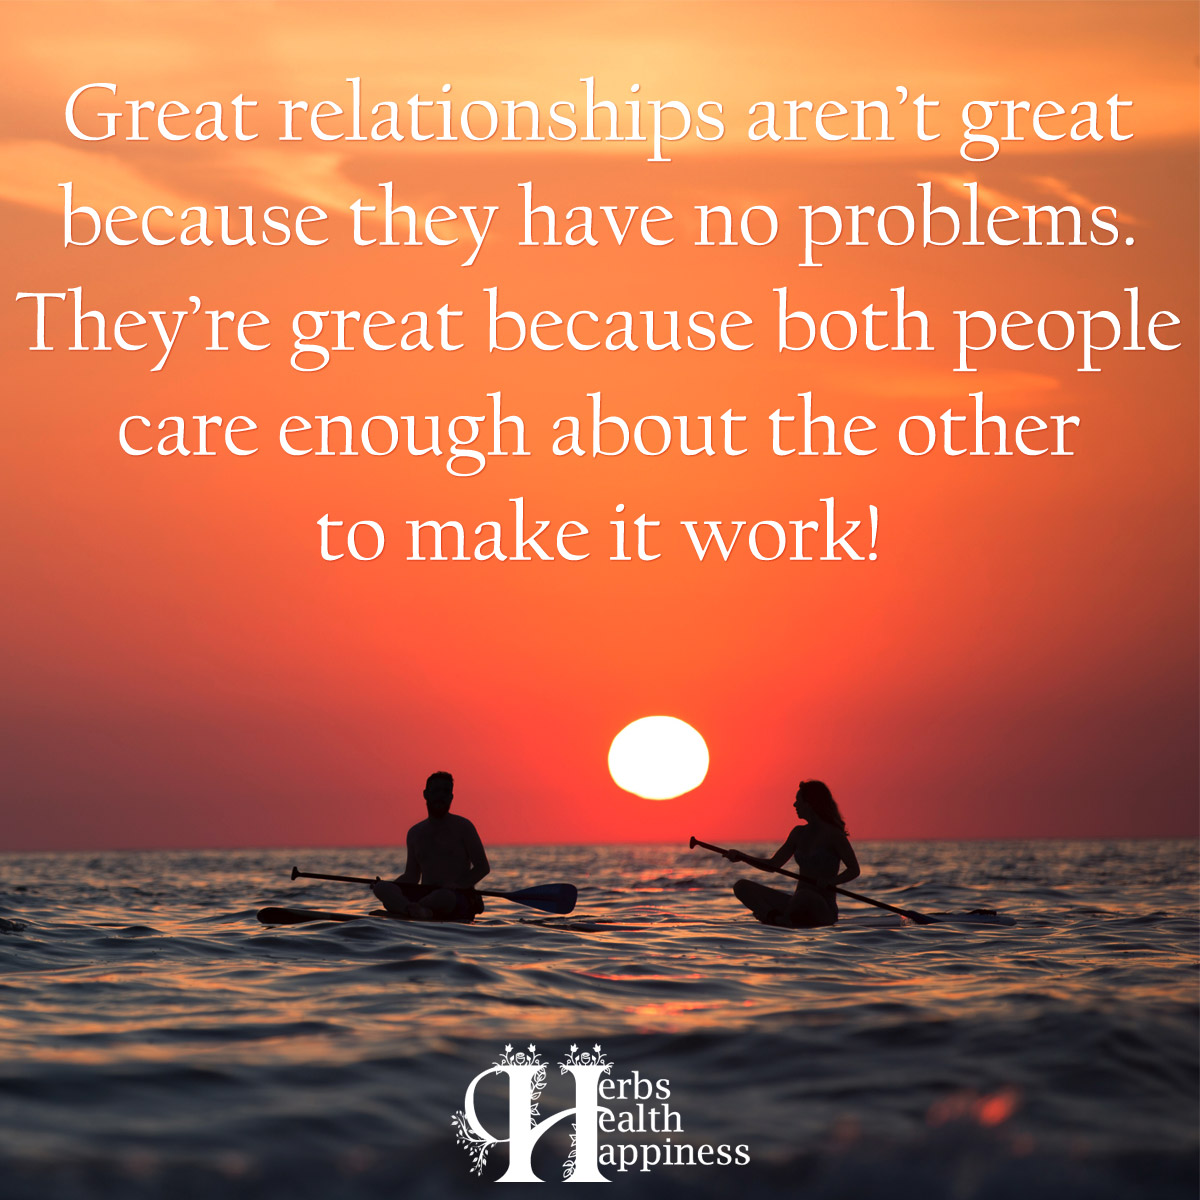 Great Relationships Aren't Great Because They Have No Problems